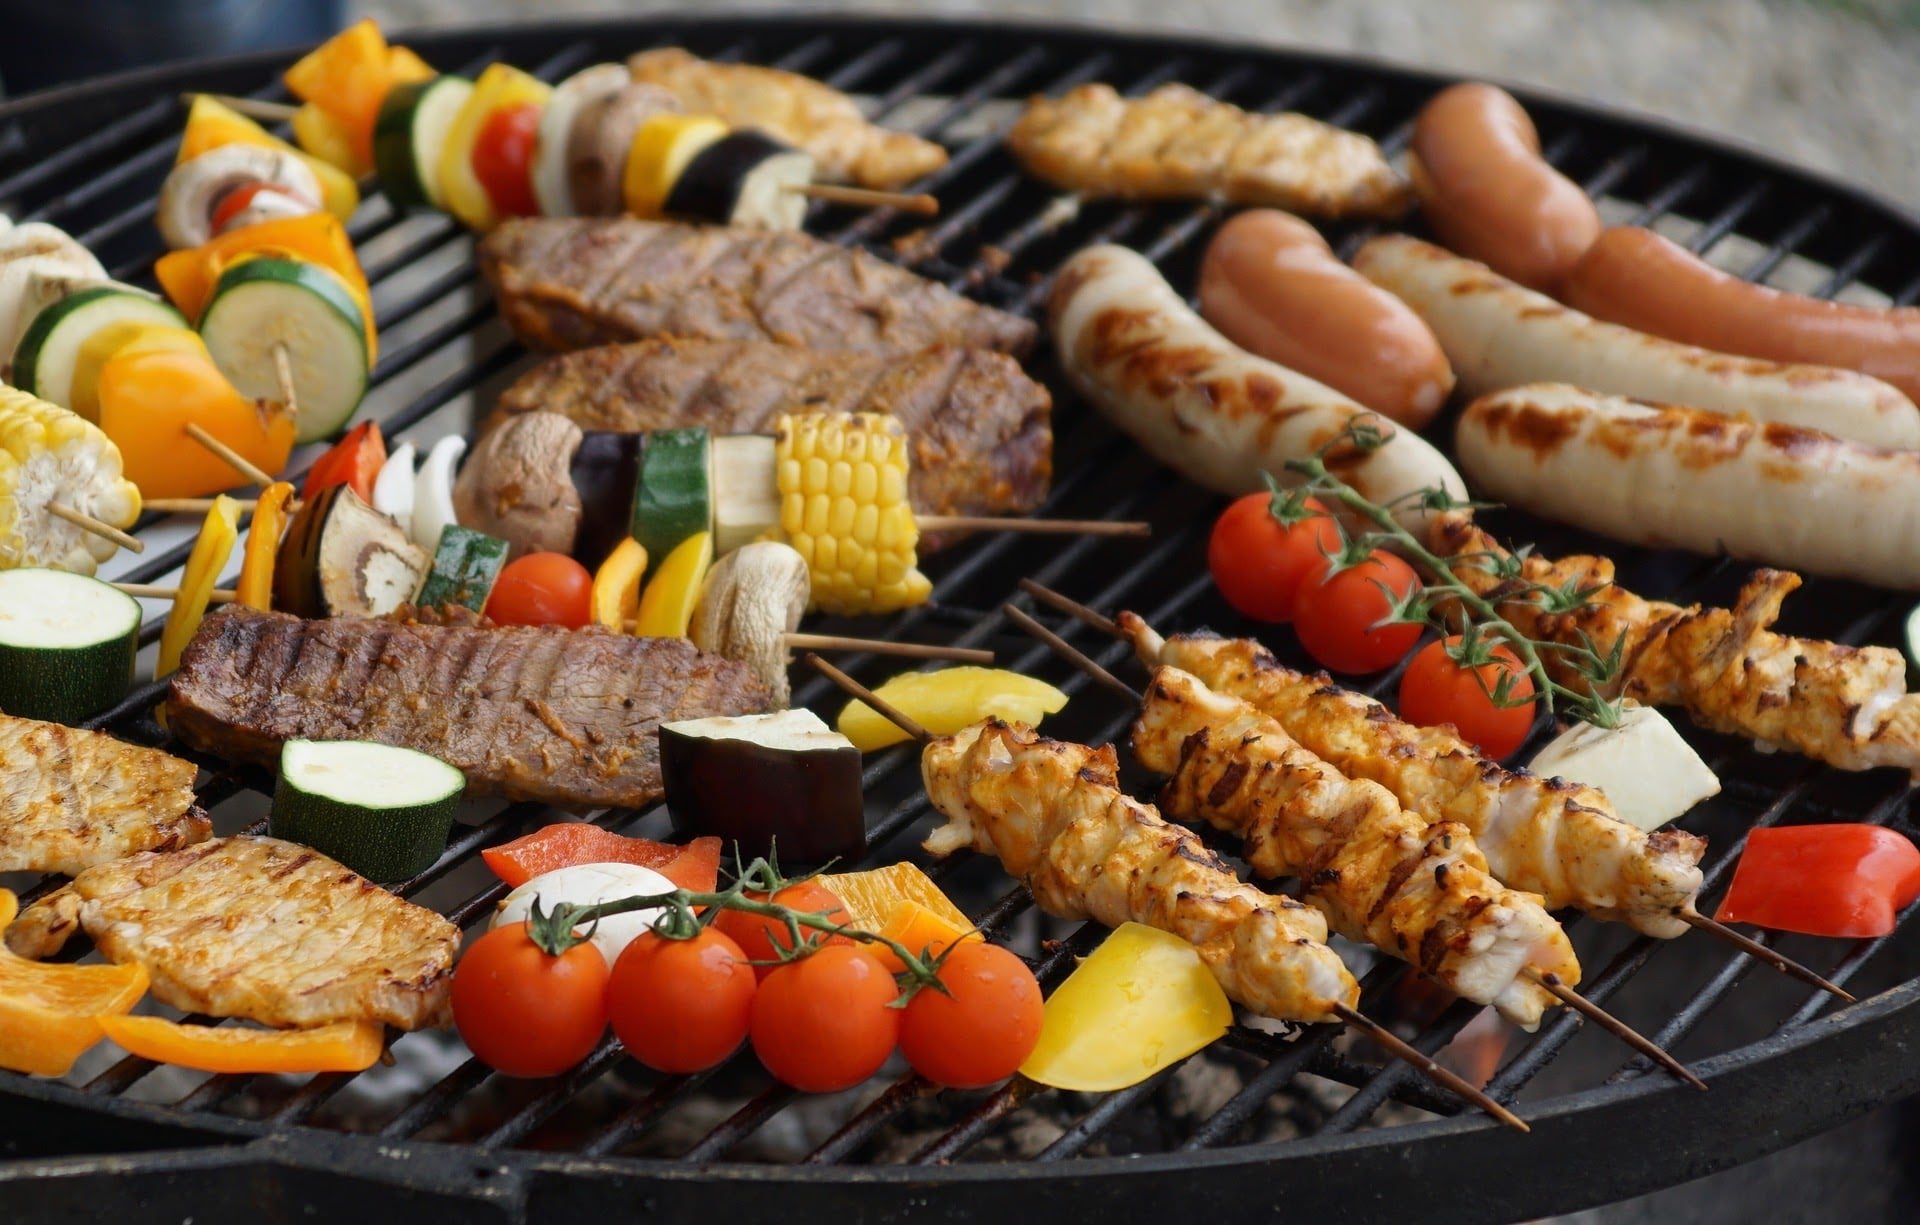 Grilling Mistakes Dietitians Wants You To Avoid